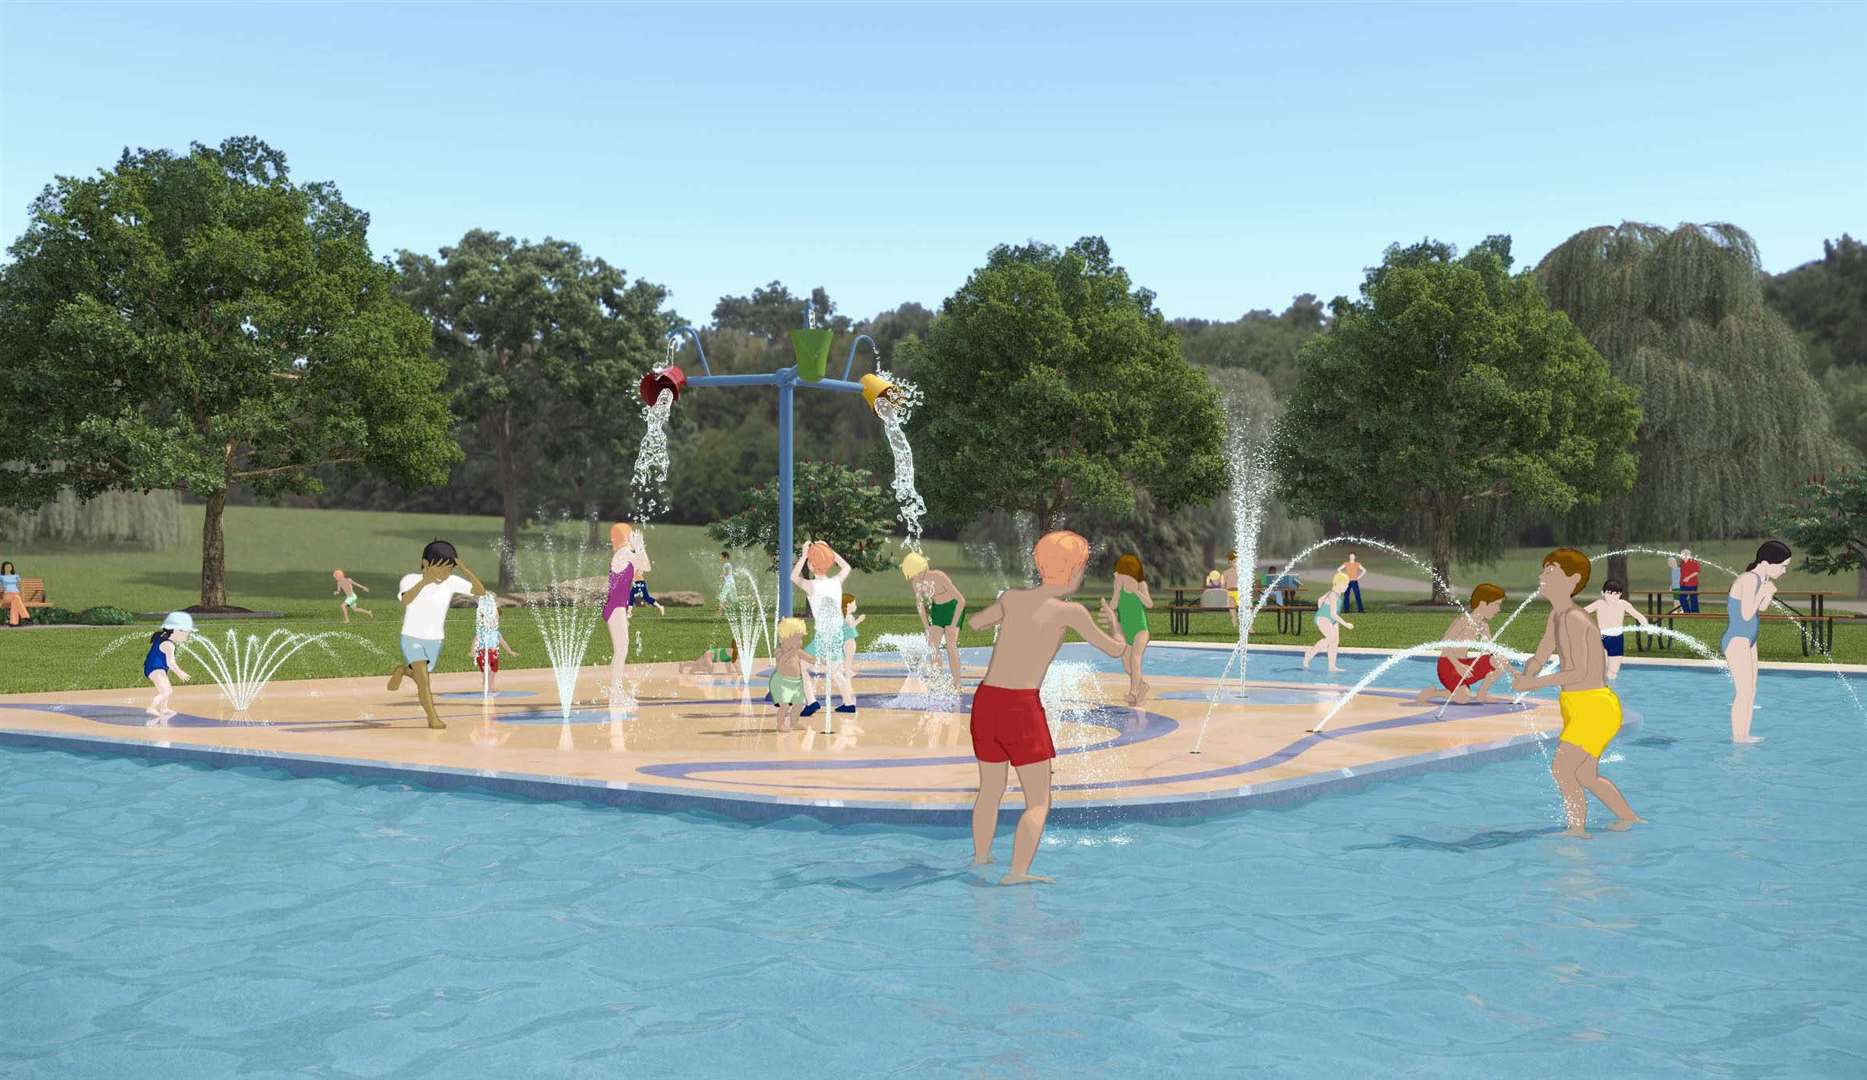 The new splash pad is being built at Swanley Park